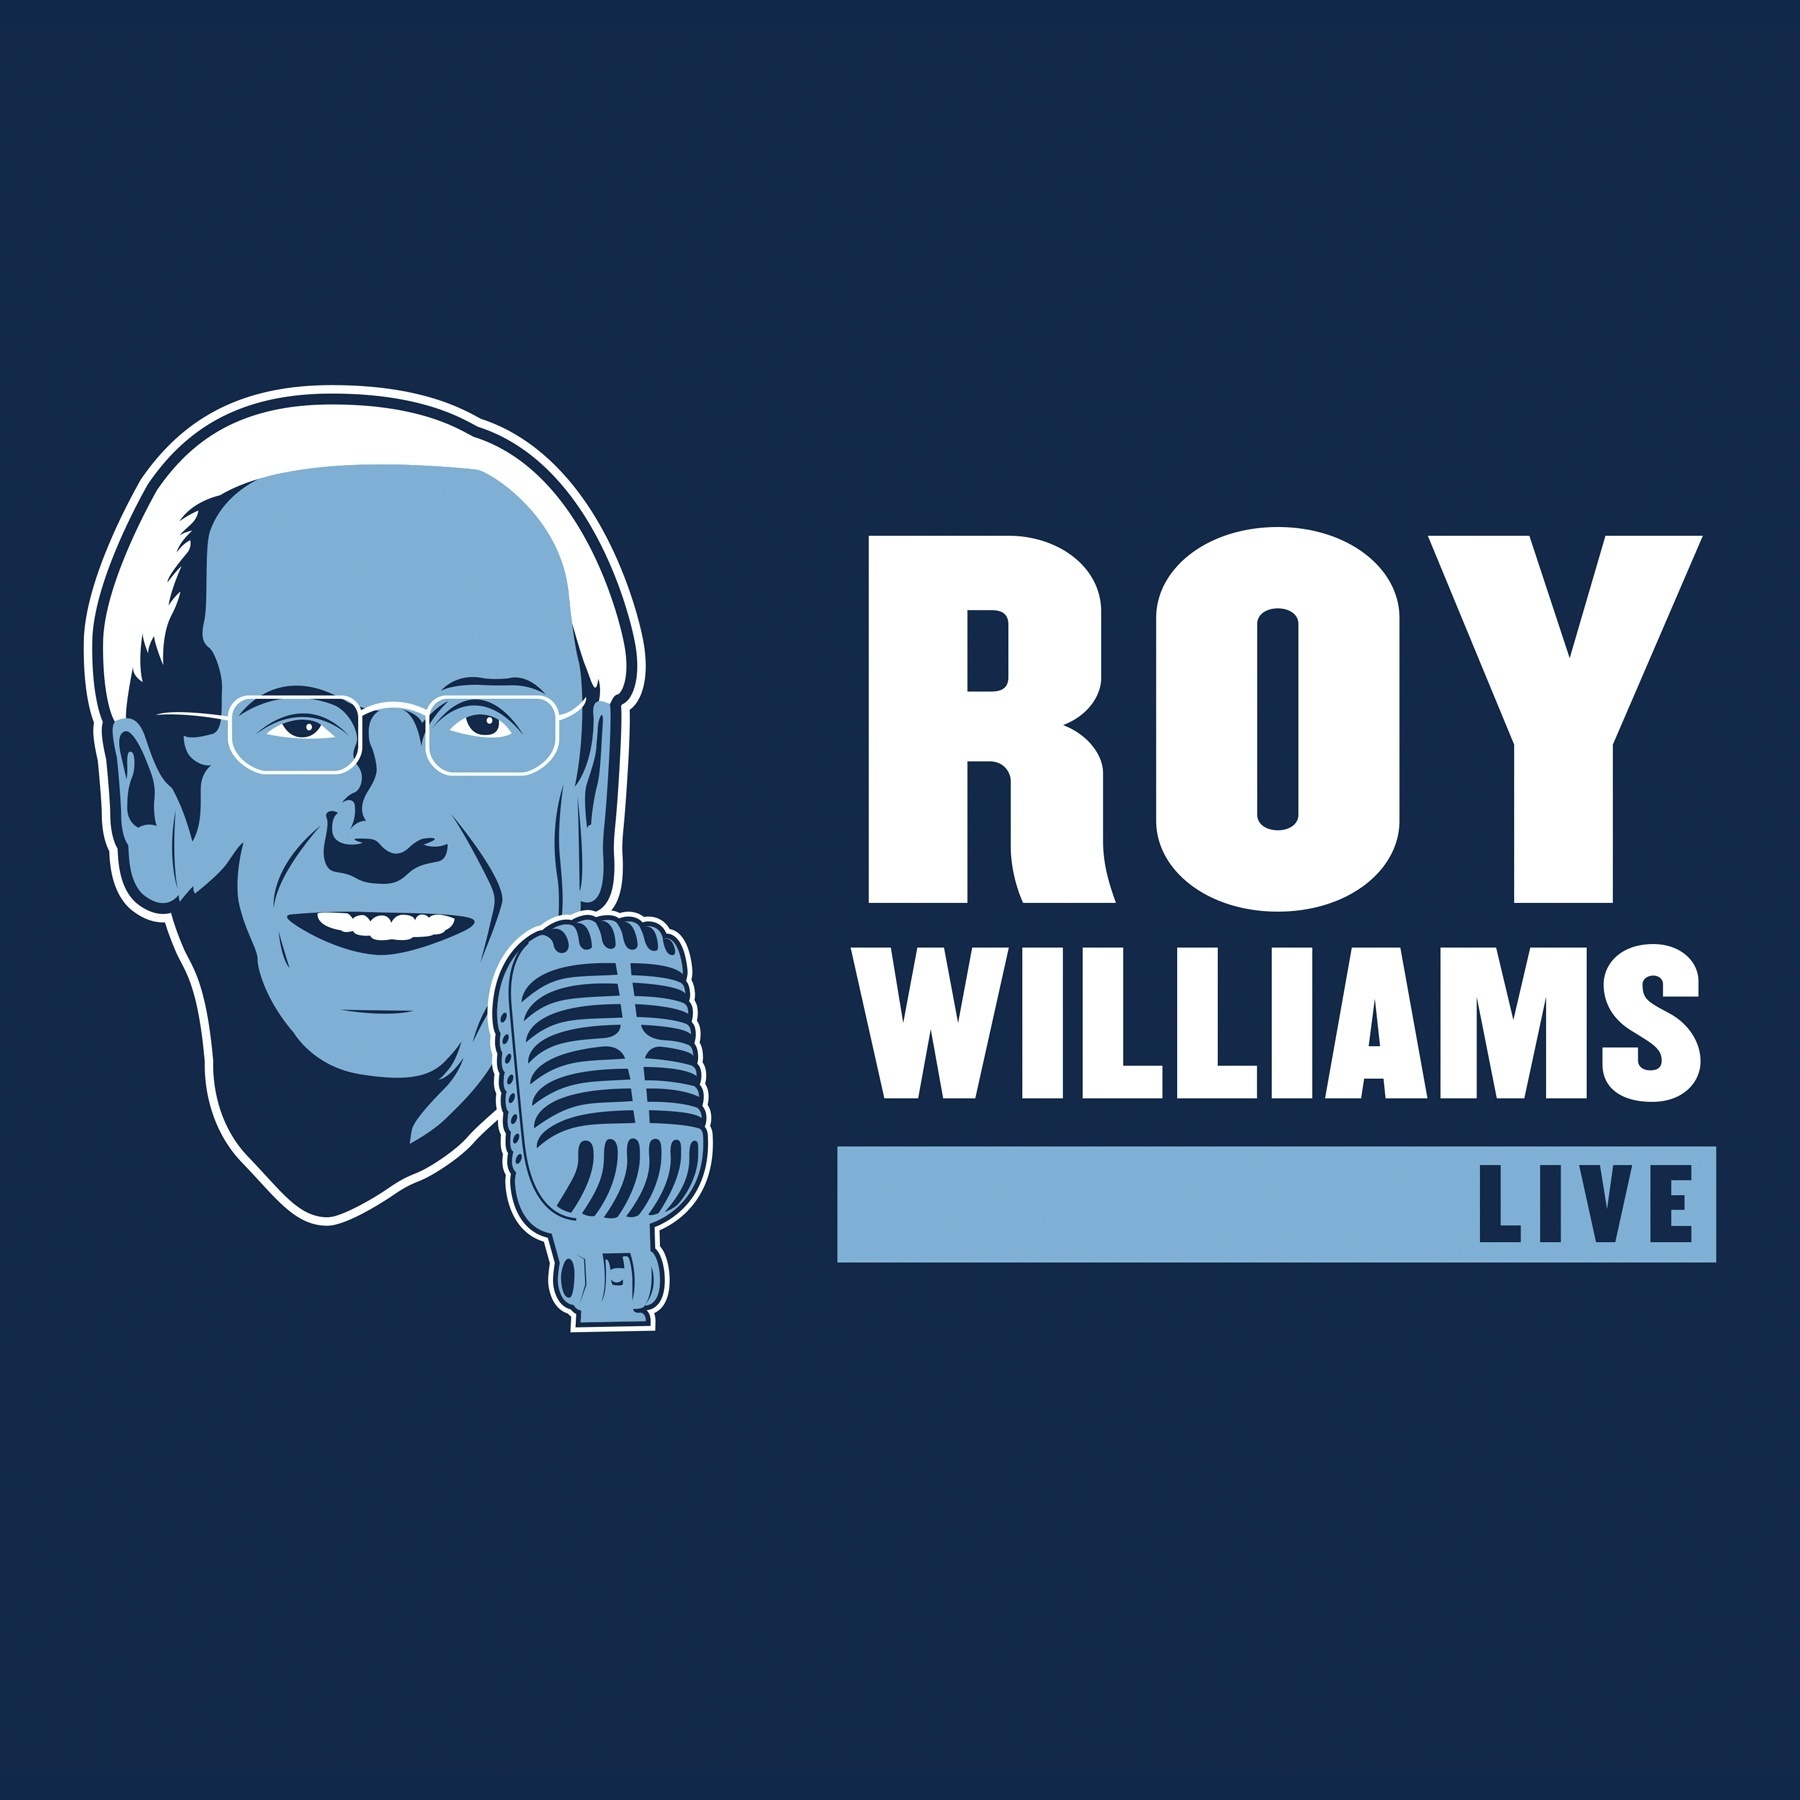 Roy Williams Live from 1-29-18